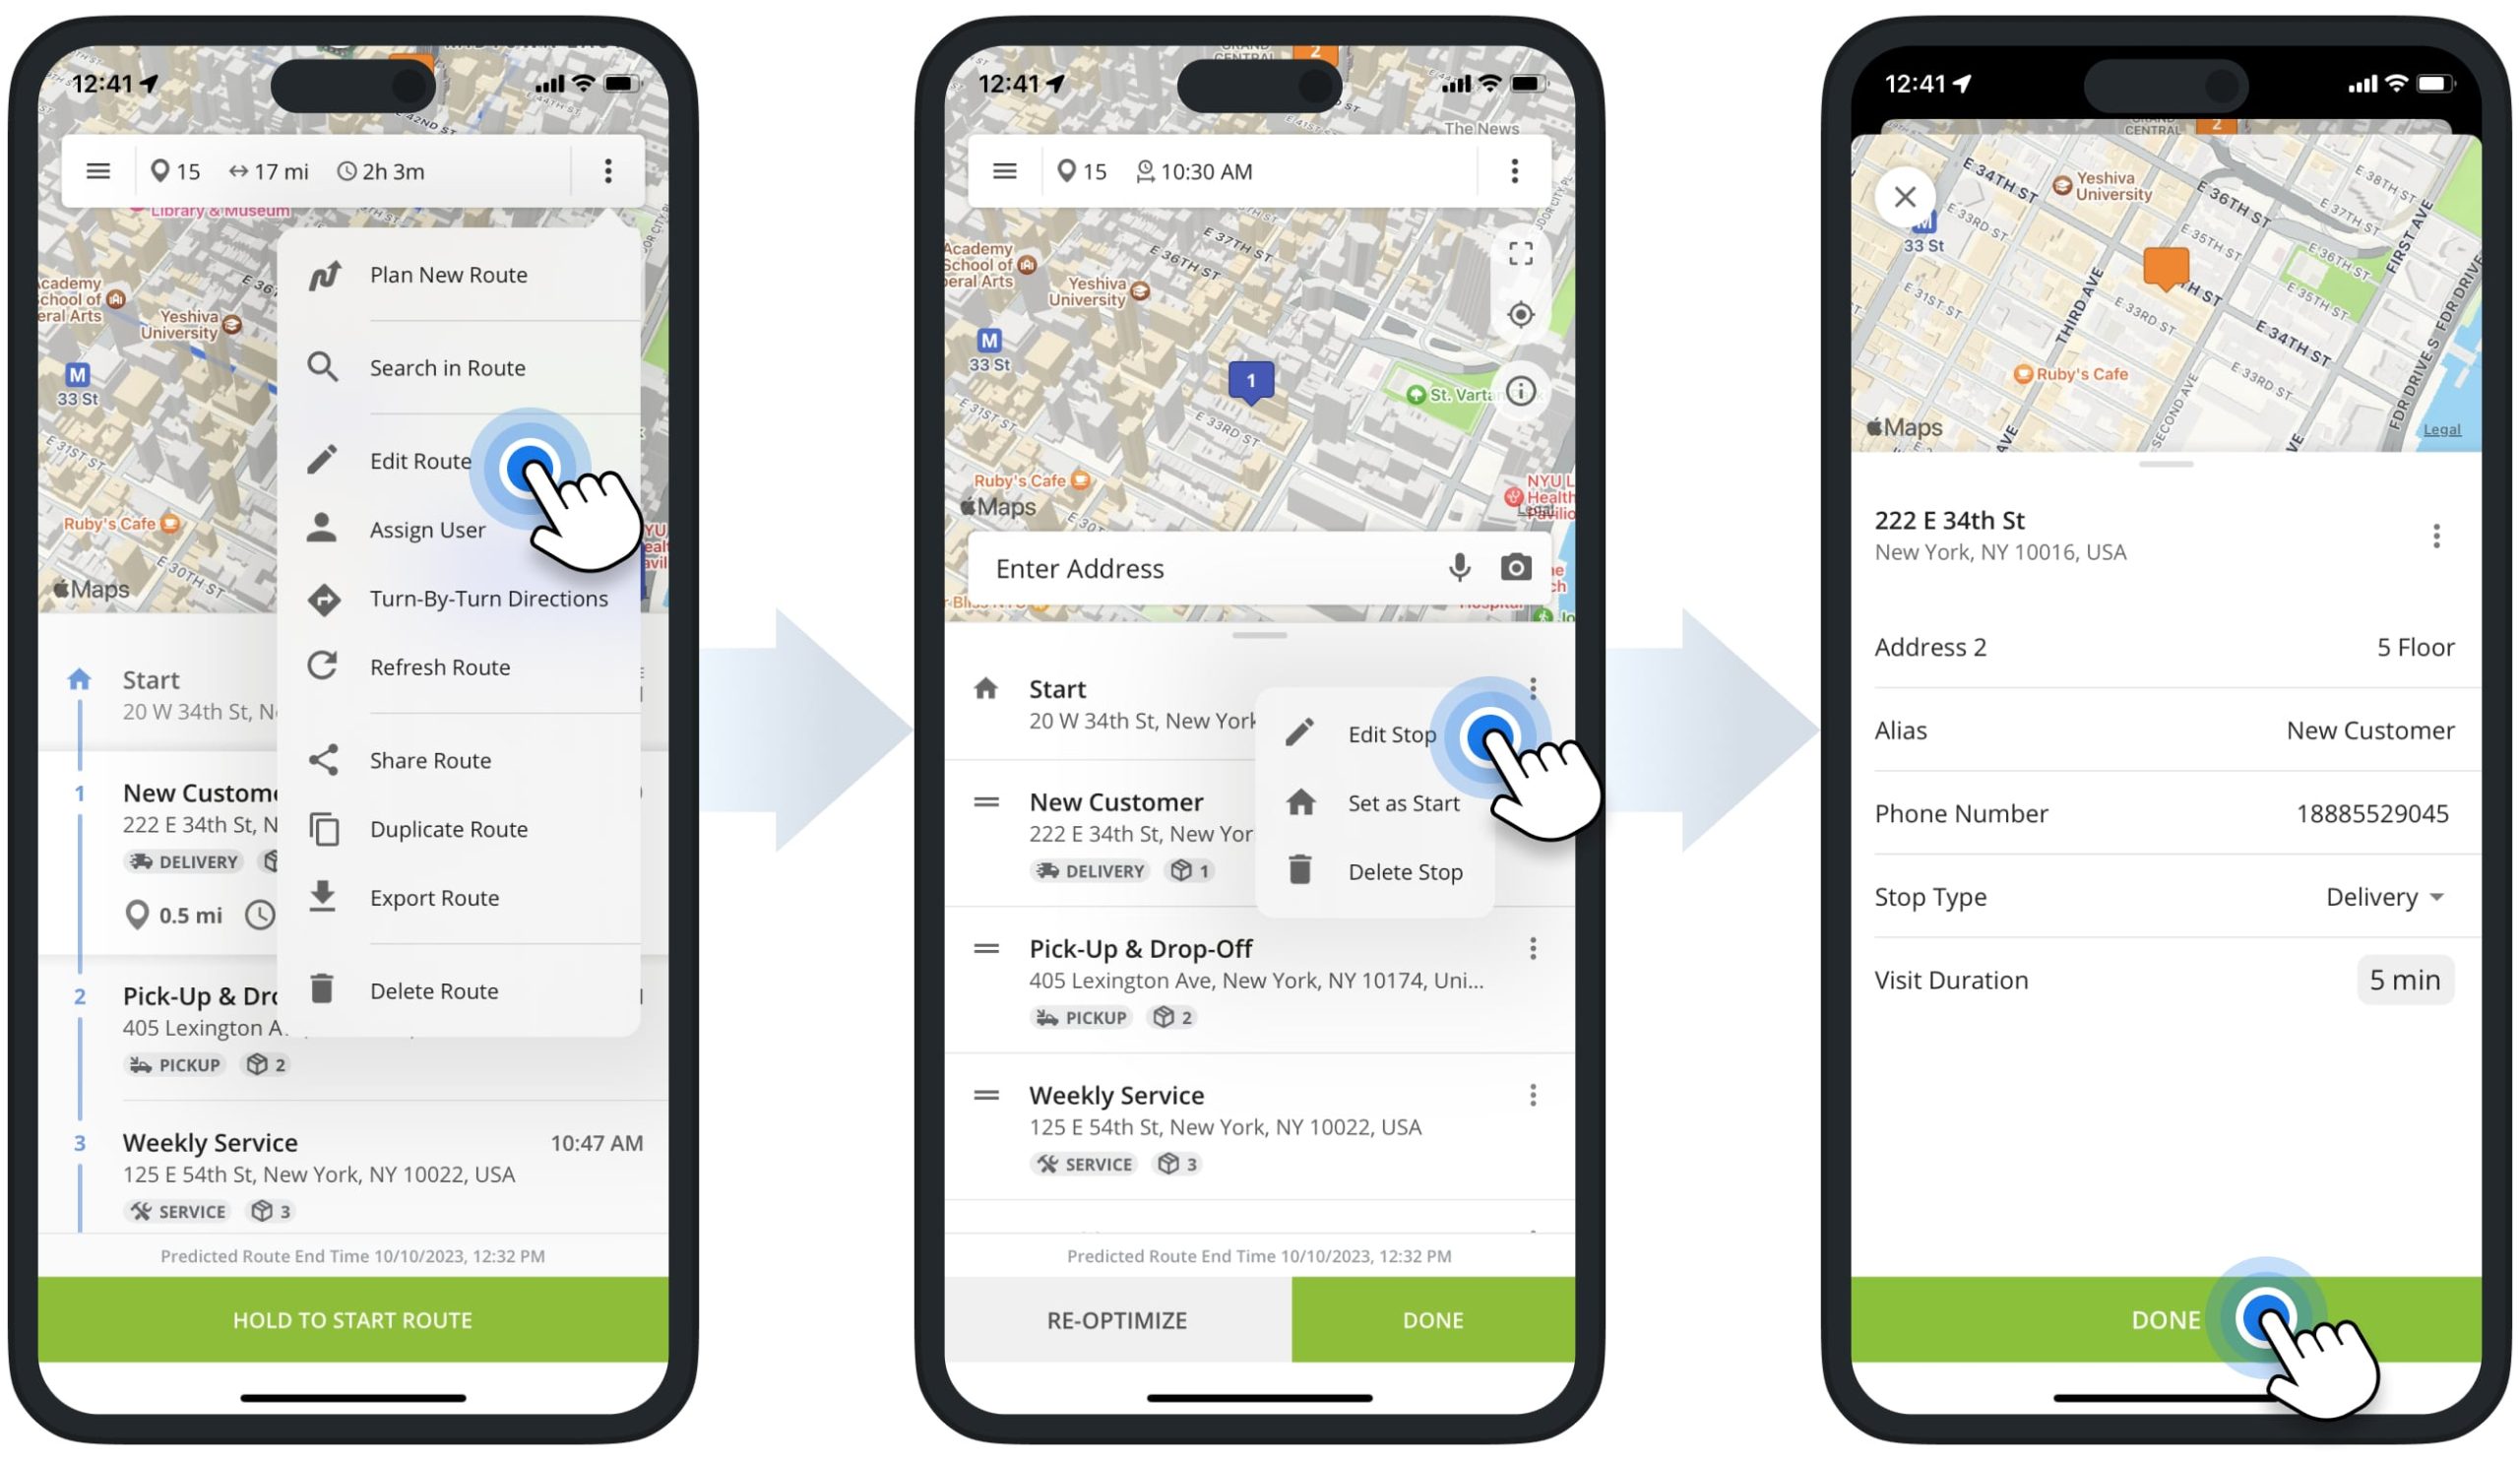 Editing route stops and address details using Route4Me's Multi-Stop Route Optimization app for delivery drivers.